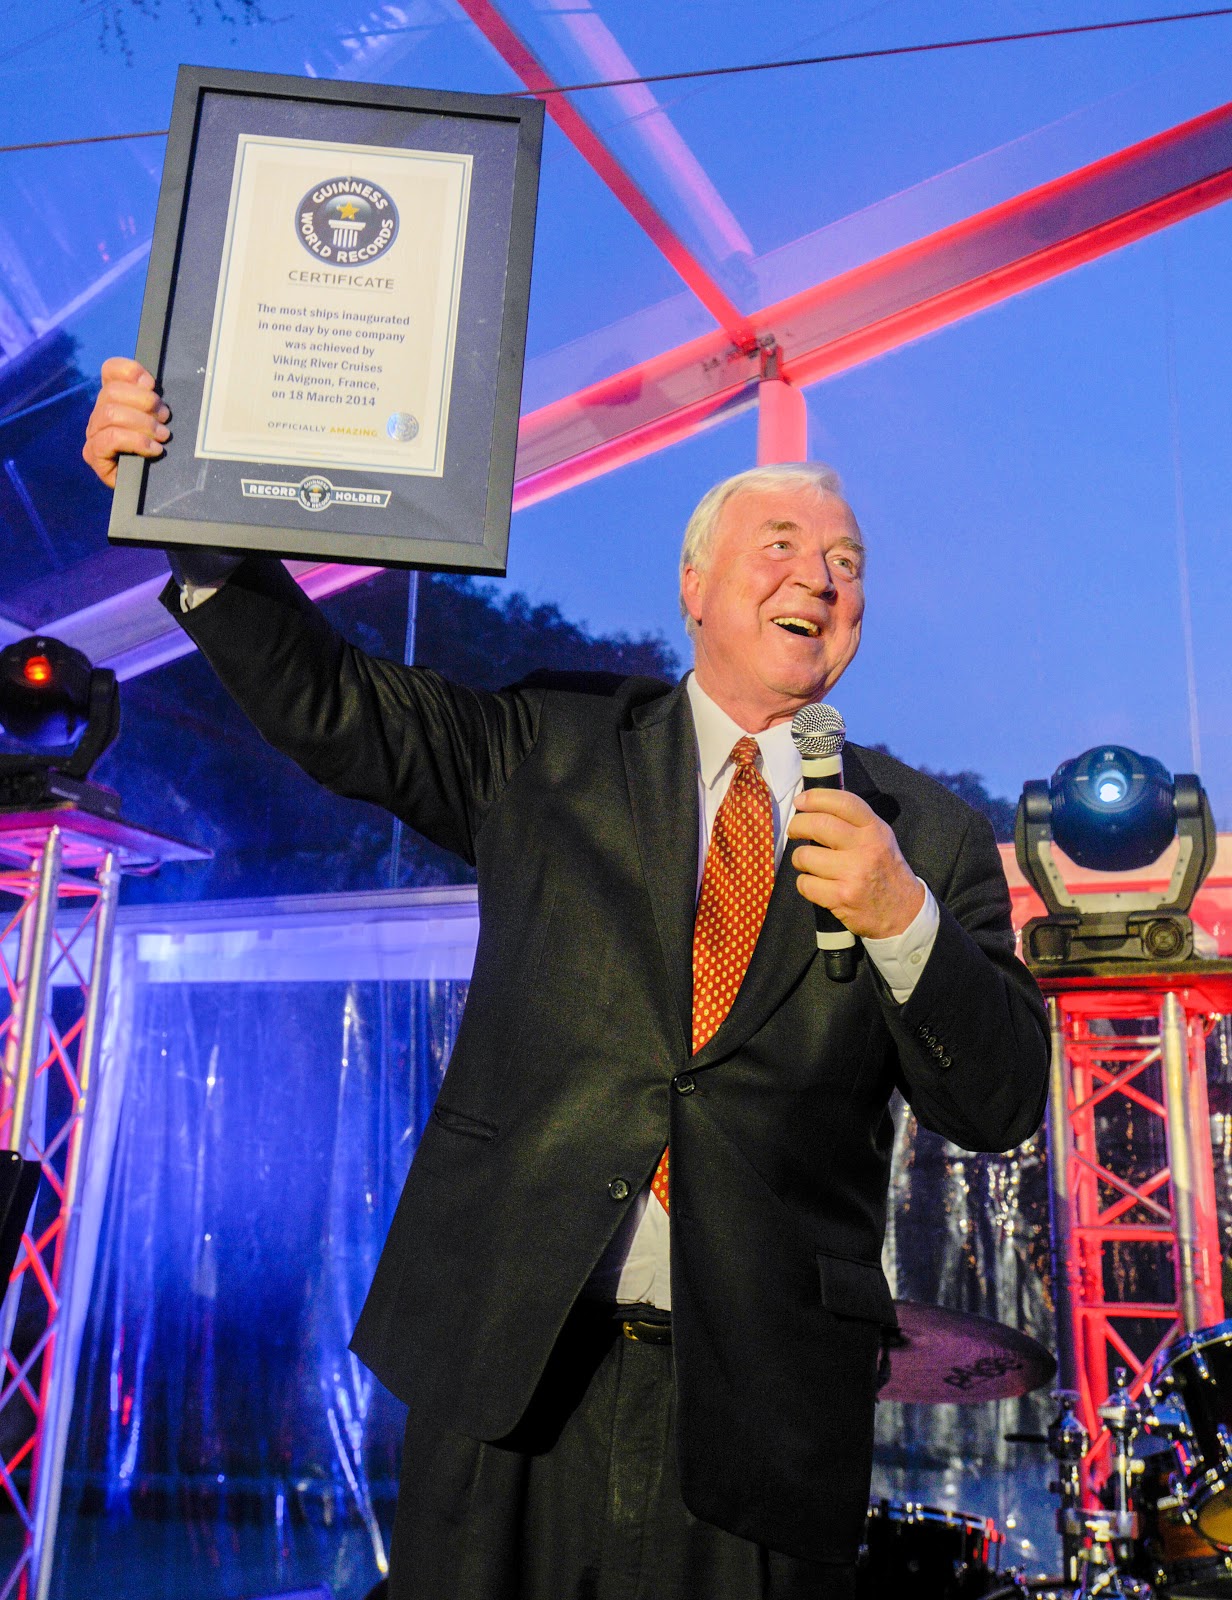 Viking Chairman Torstein Hagen proudly displays his Guinness World Records certificate. Photo: Courtesy of Viking Cruises. Unauthorized use is prohibited.